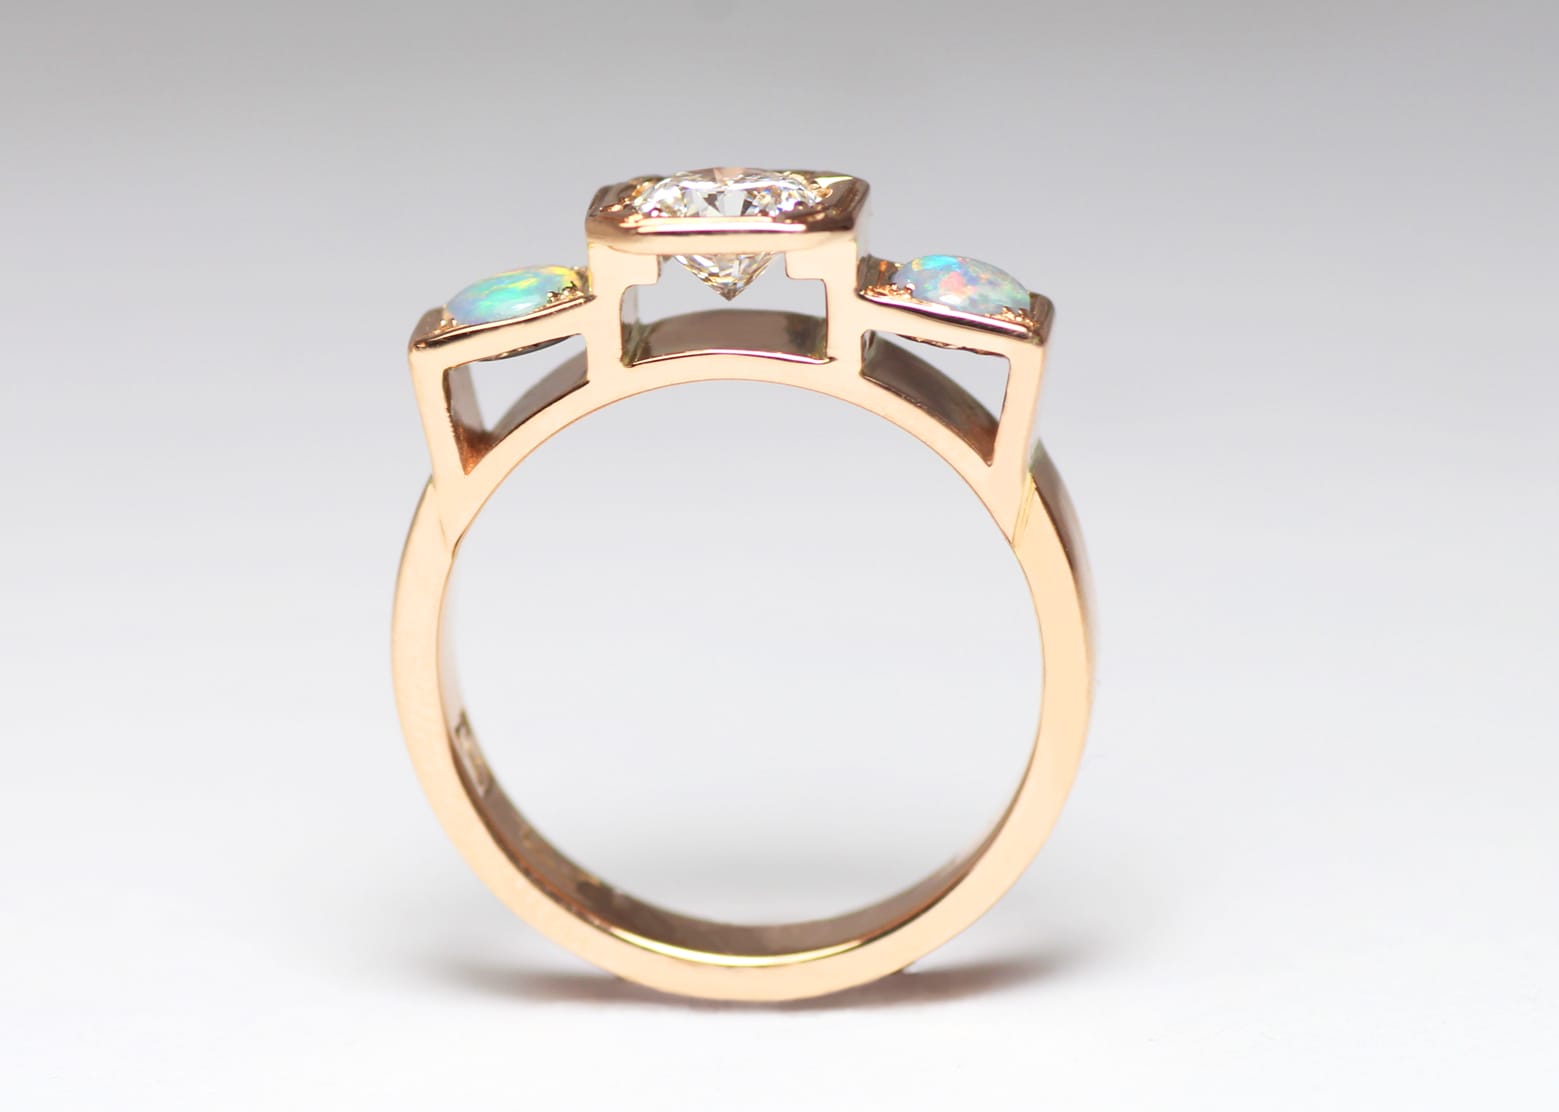 18ct Fairtrade rose gold with vintage diamond and opals by Zoe Pook Jewellery